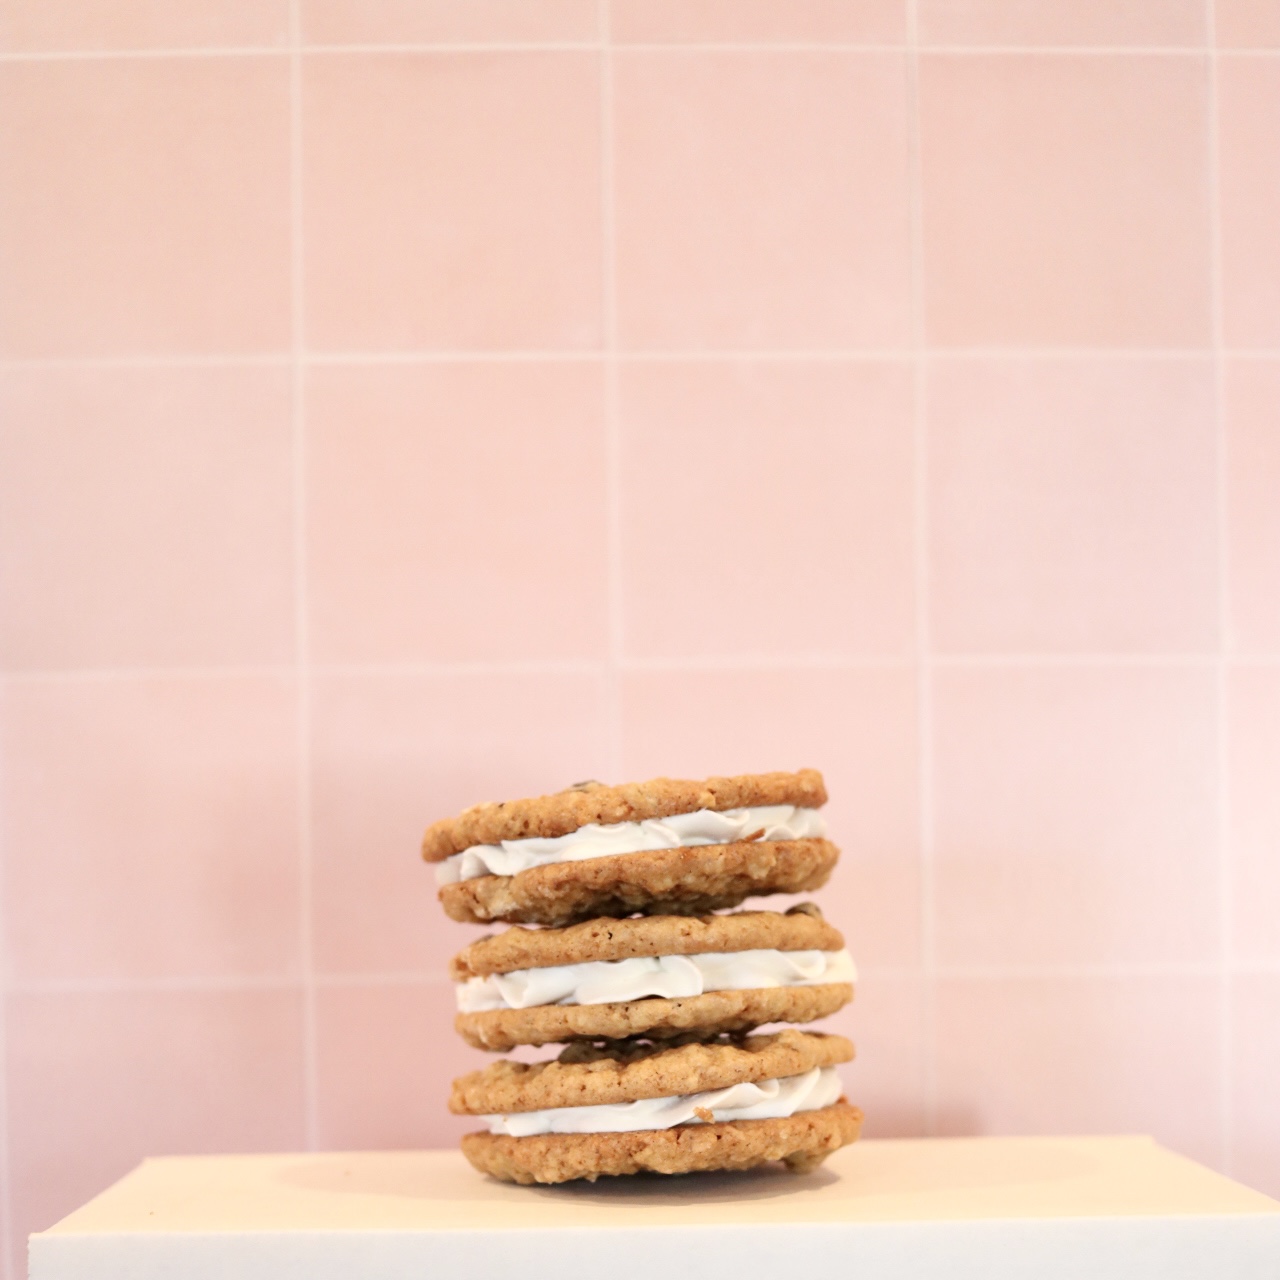 Oatmeal Cookie Sandwiches with Buttercream Filling